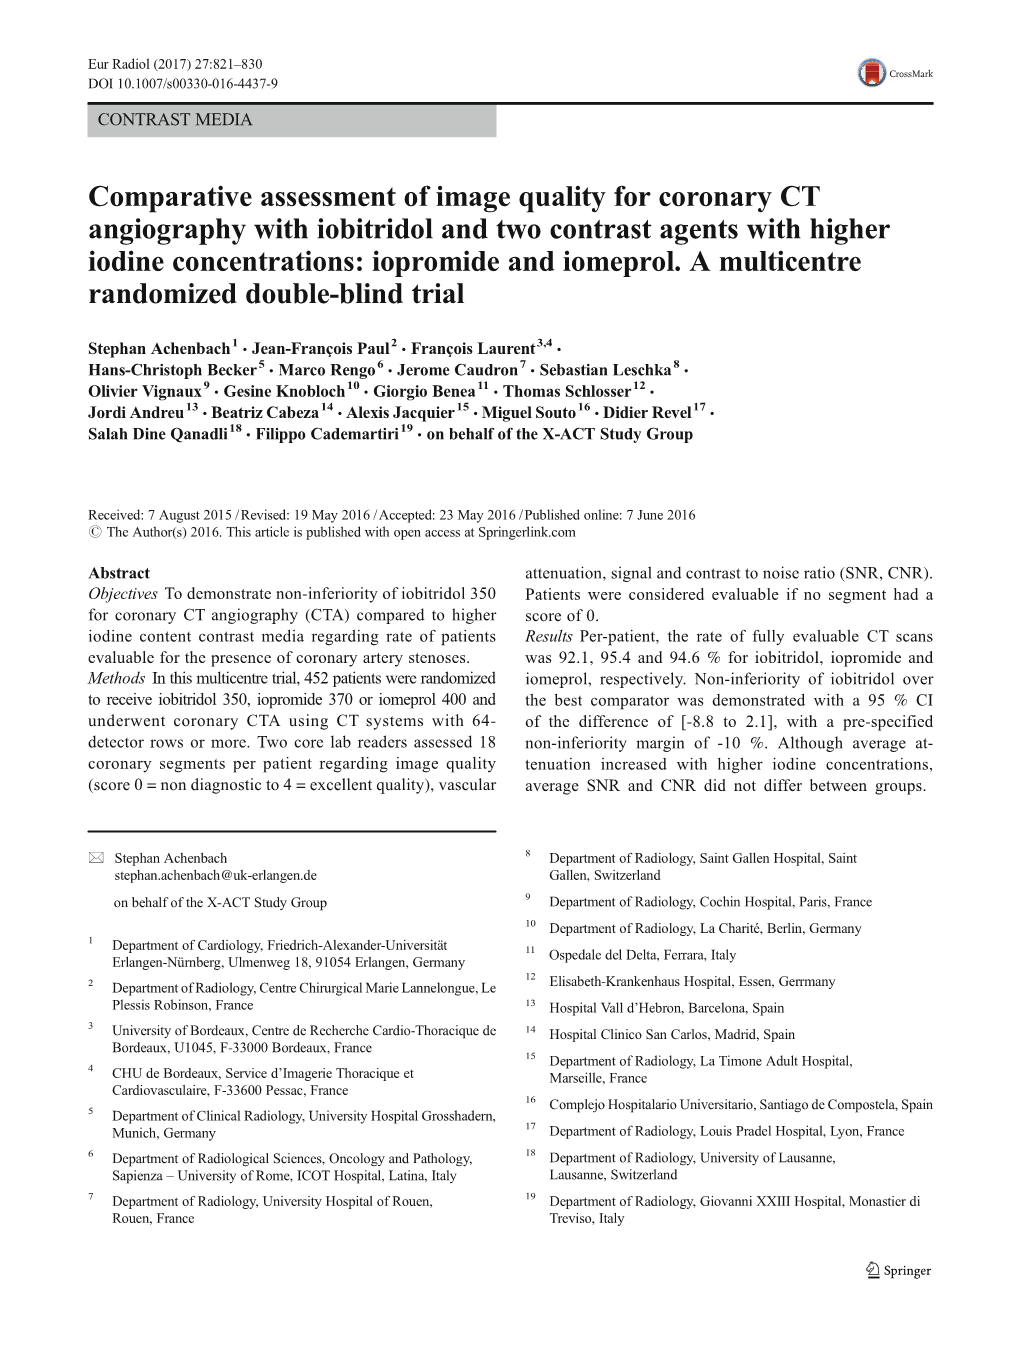 Comparative Assessment of Image Quality for Coronary CT Angiography with Iobitridol and Two Contrast Agents with Higher Iodine Concentrations: Iopromide and Iomeprol